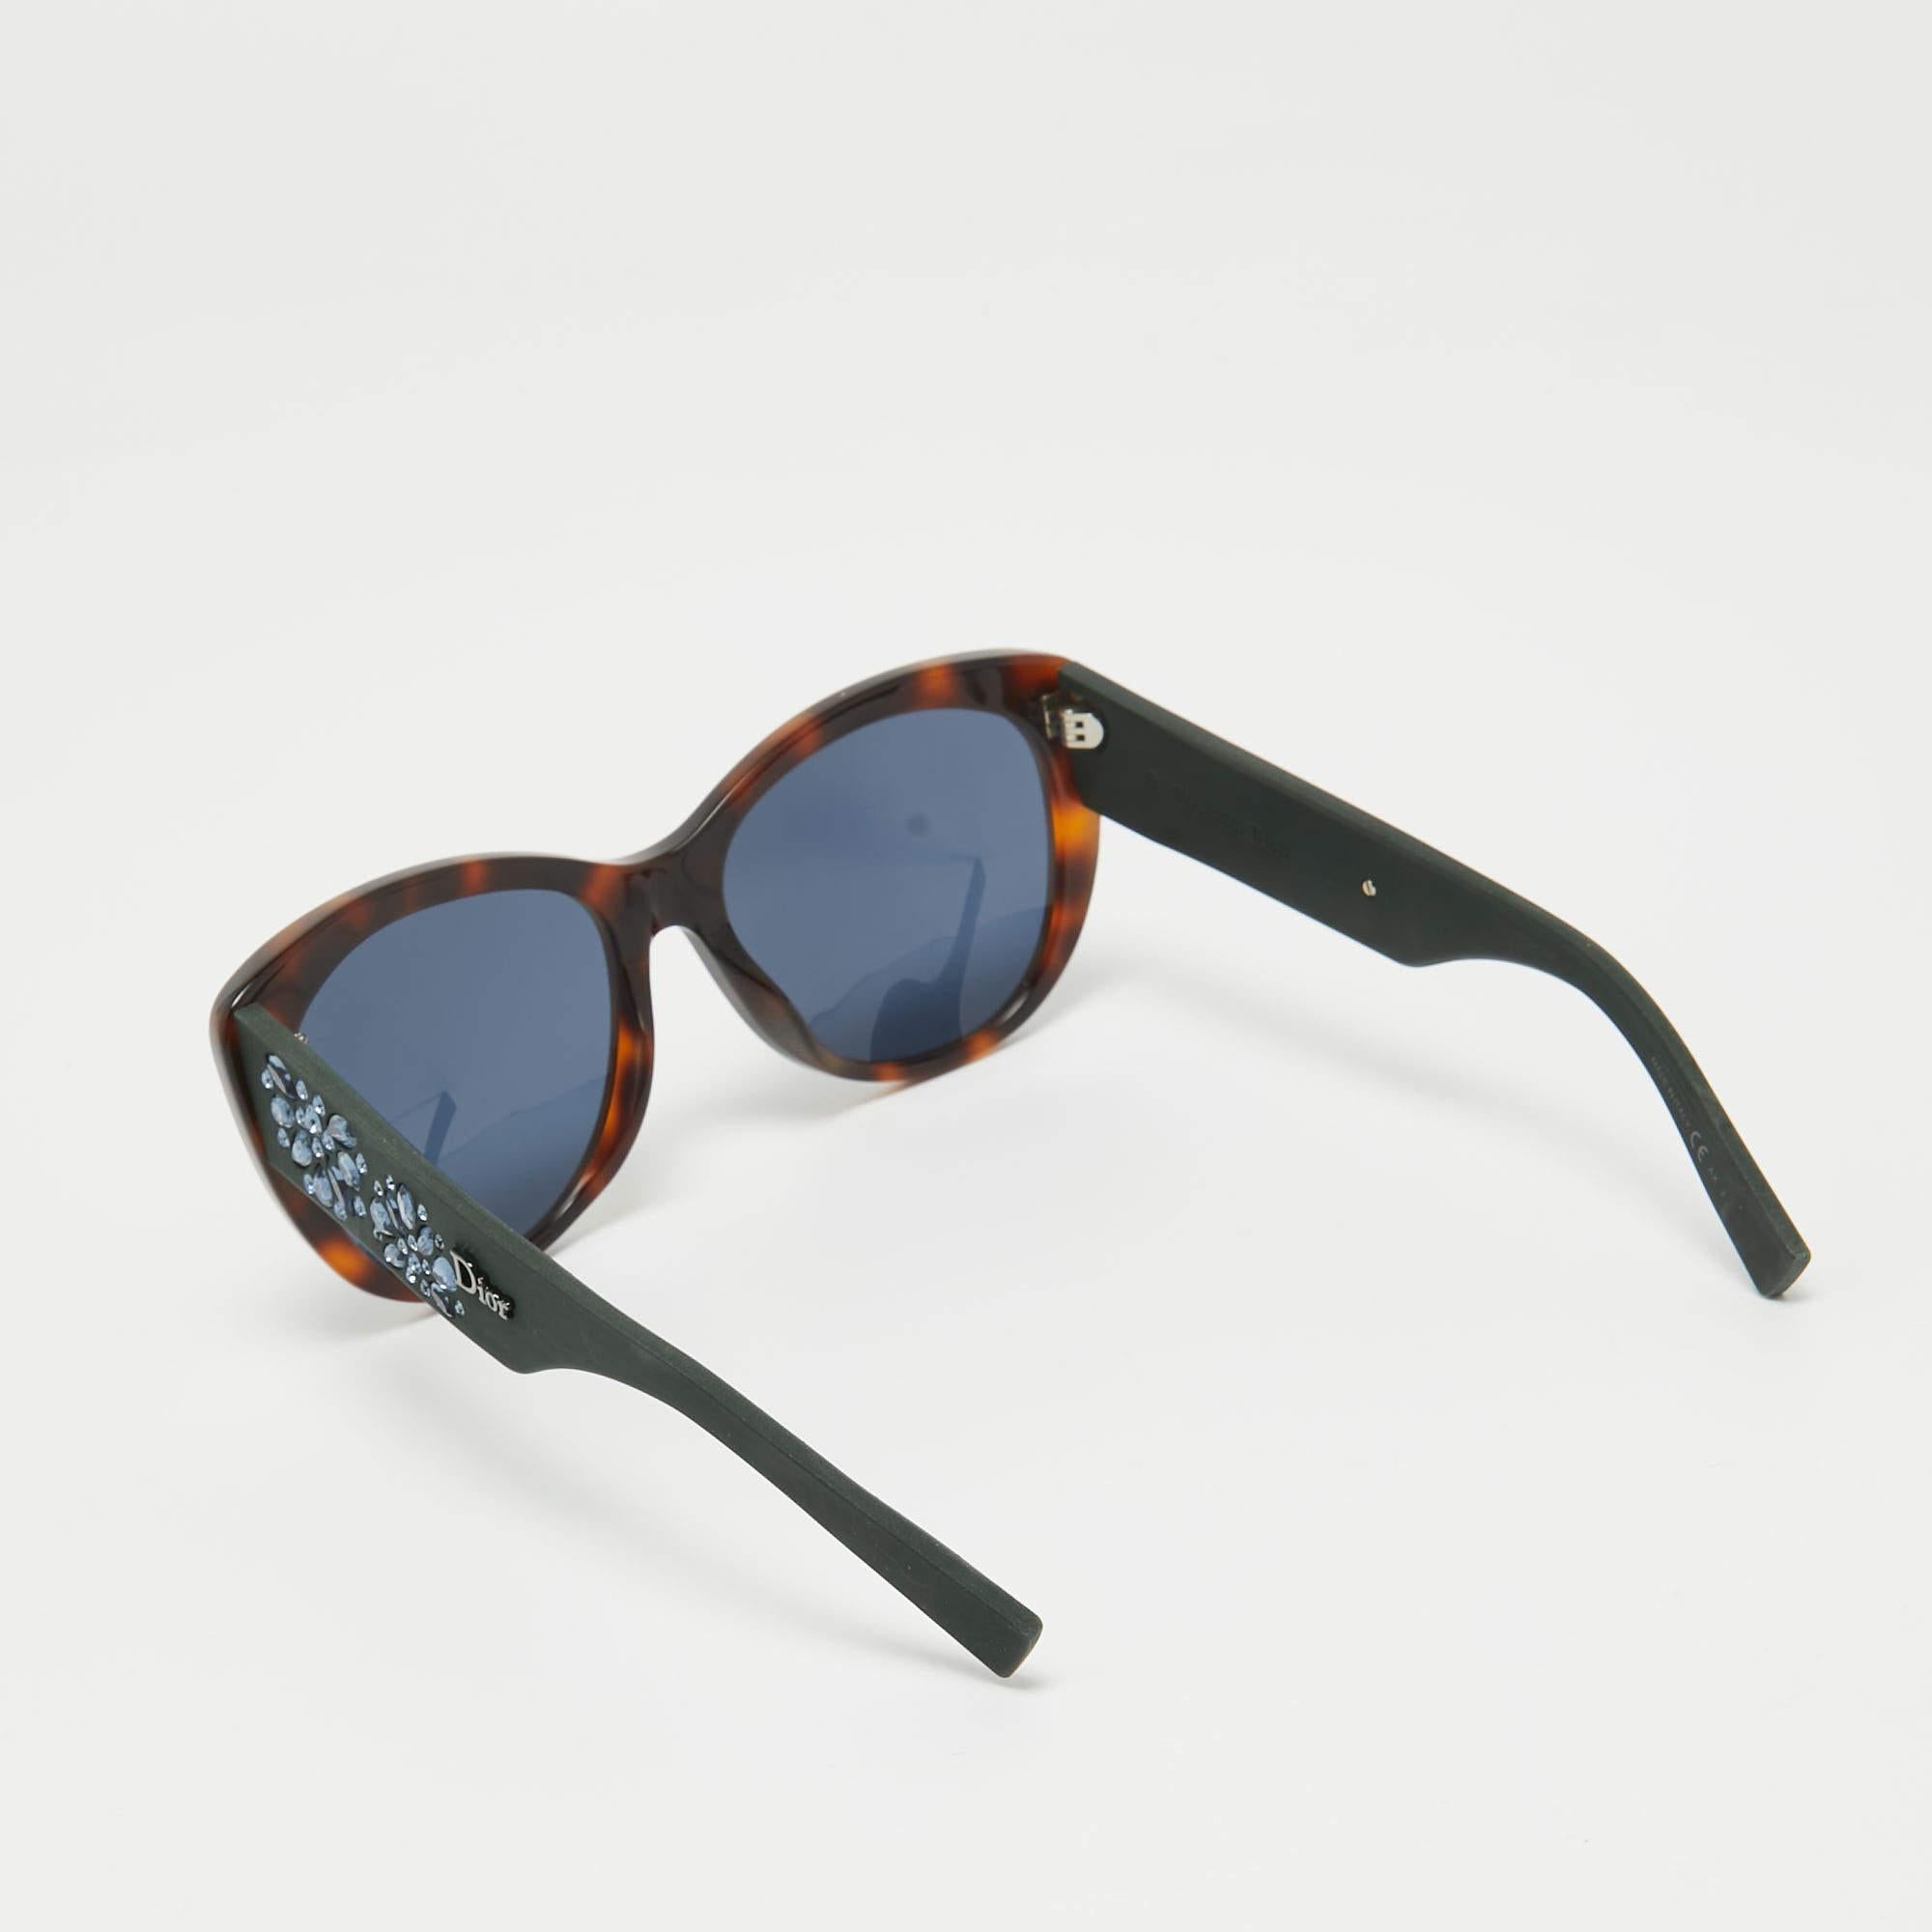 A statement pair of sunglasses from Dior will surely make a prized buy. Featuring a trendy frame and lenses meant to protect your eyes, the sunglasses are ideal for all-day wear.

